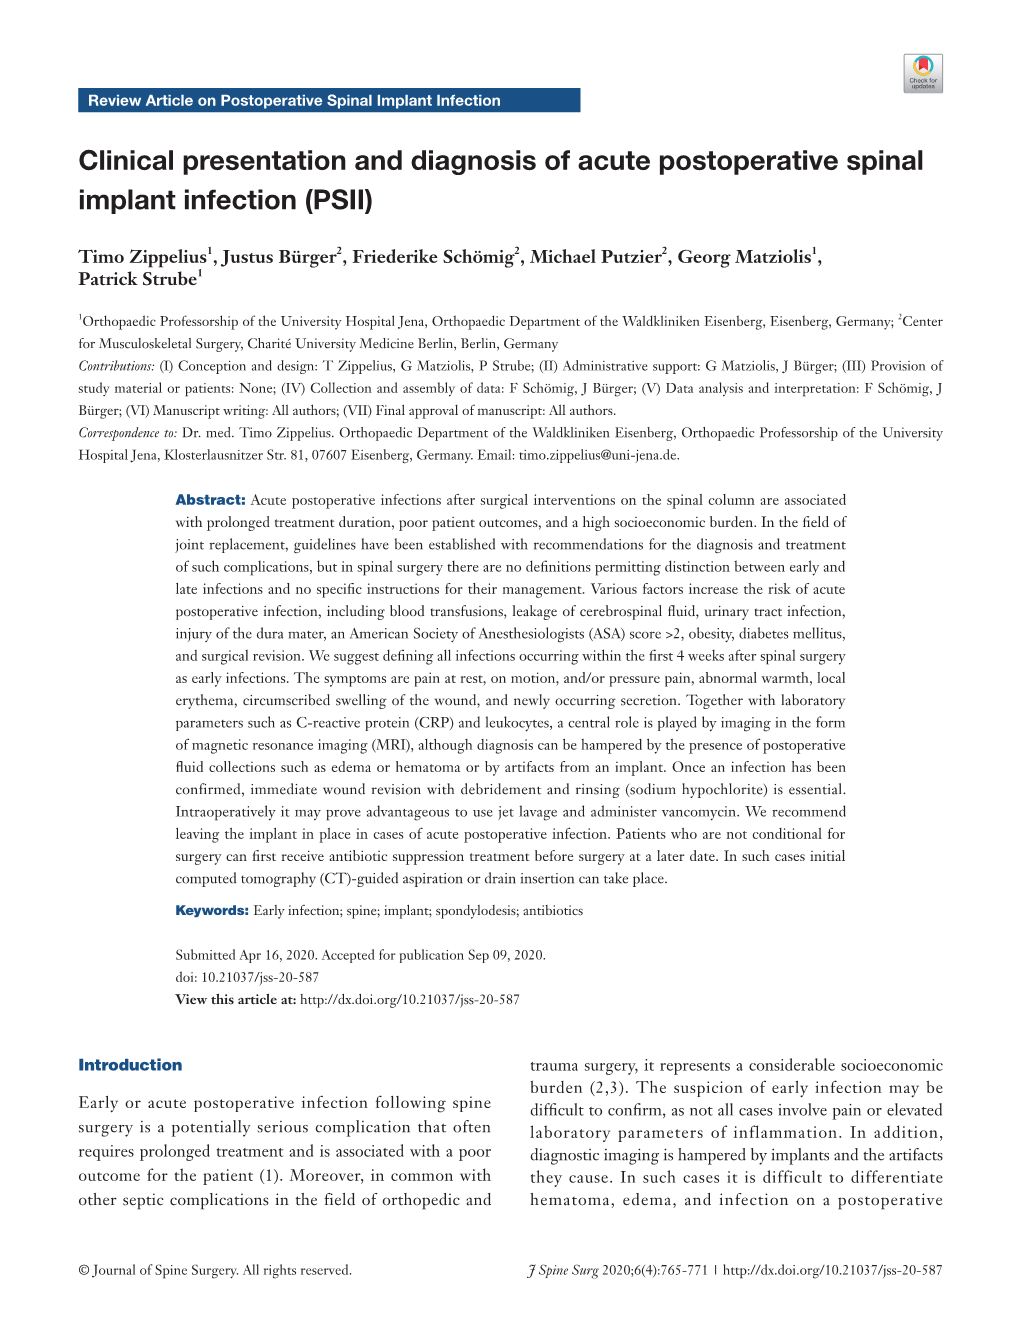 Clinical Presentation and Diagnosis of Acute Postoperative Spinal Implant Infection (PSII)